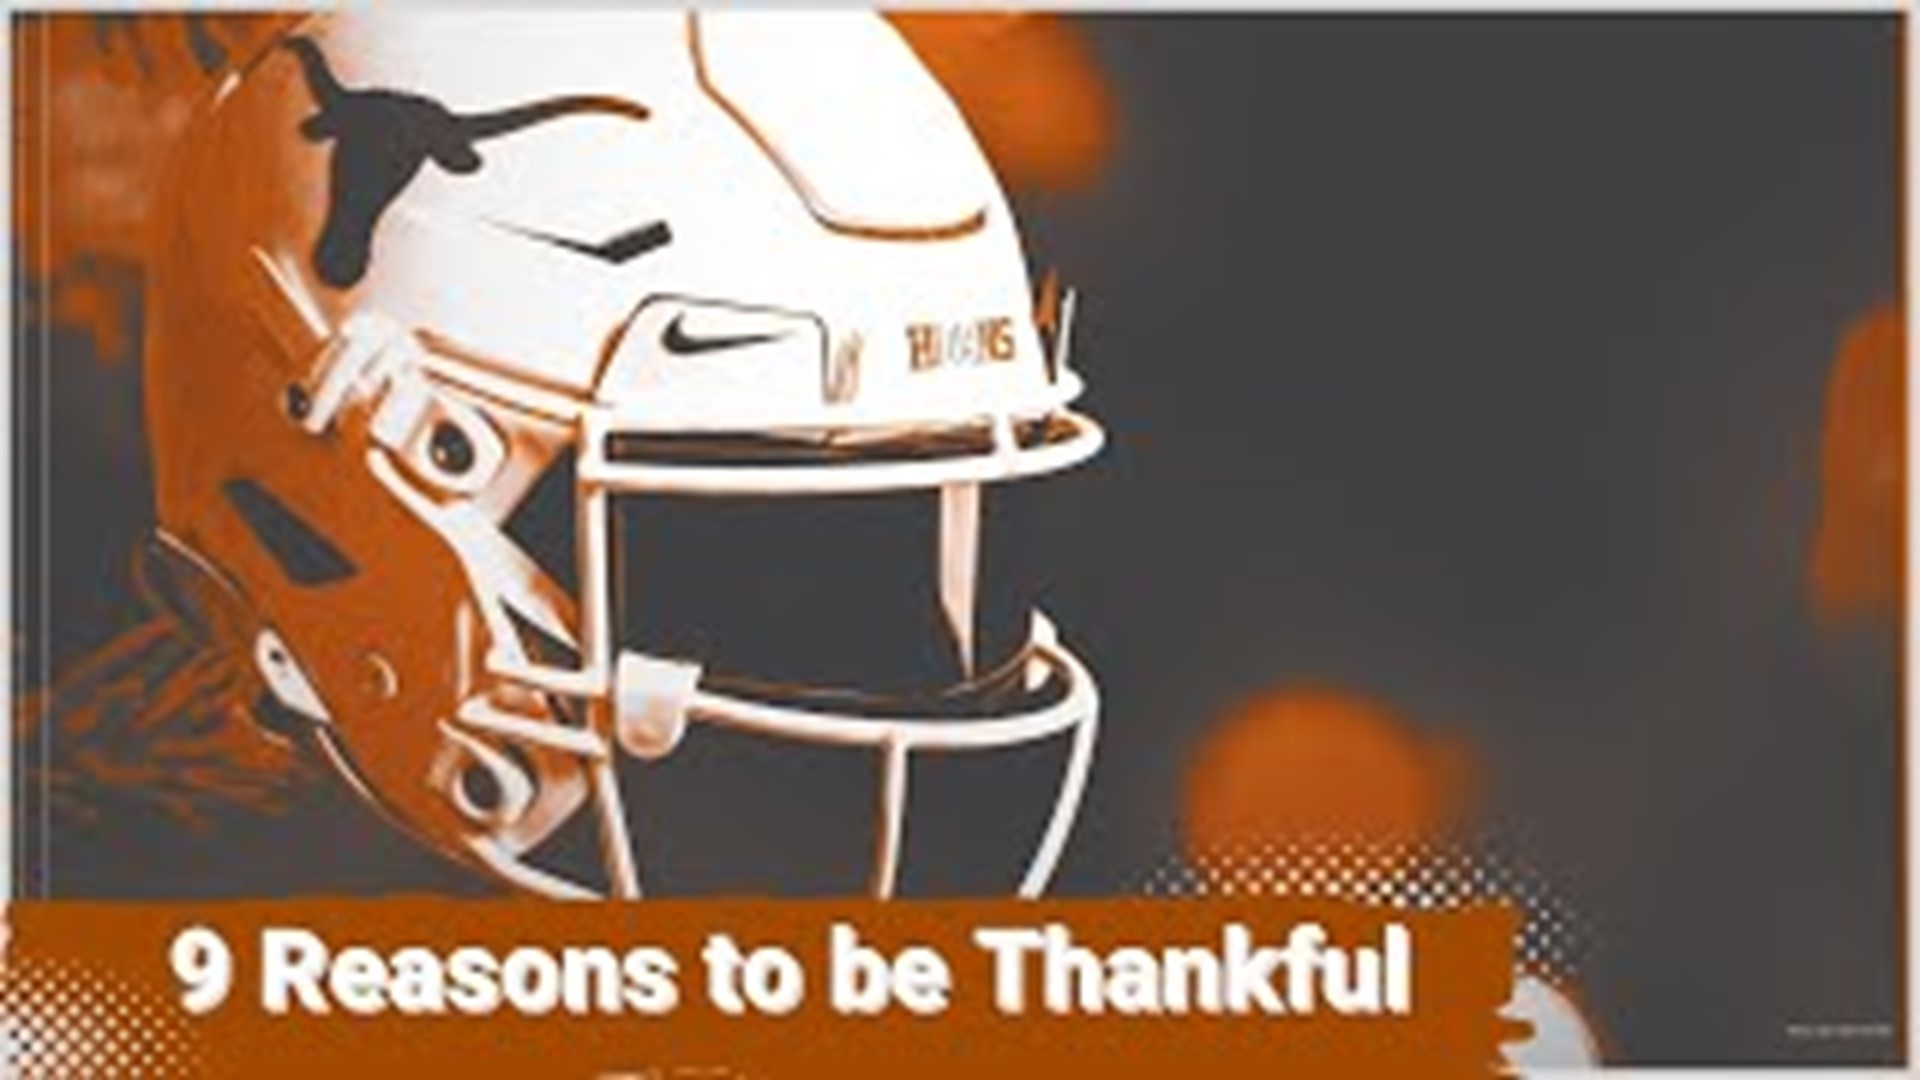 On today's episode of Locked on Longhorns, we provide nine reasons that Texas fans should be thankful for, specifically regarding the football program.